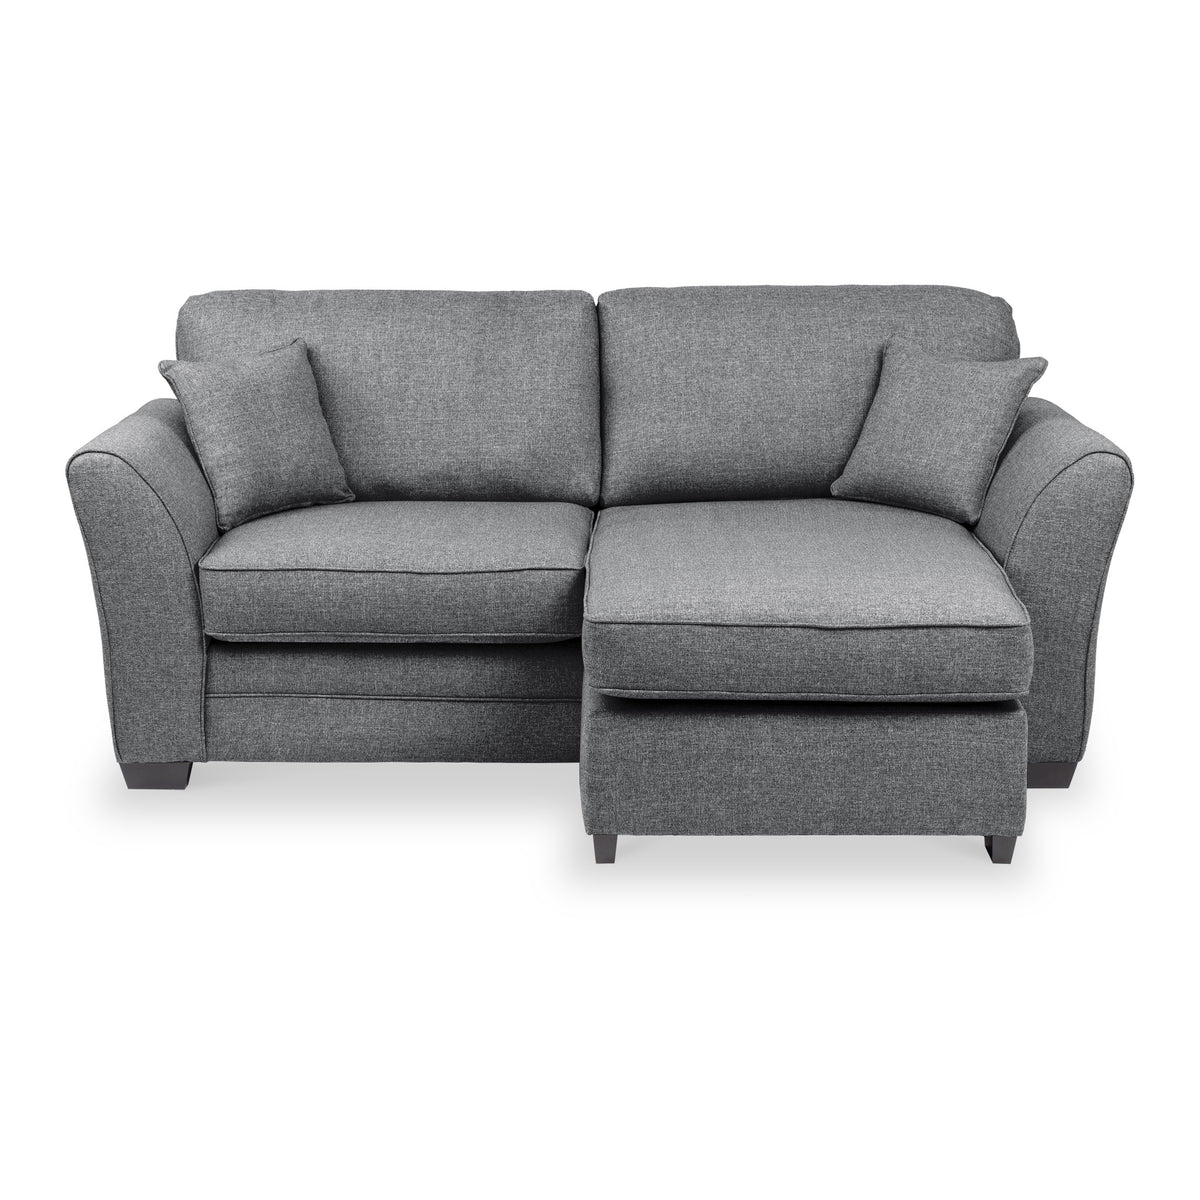 St Ives Chaise Sofa in Charcoal by Roseland Furniture